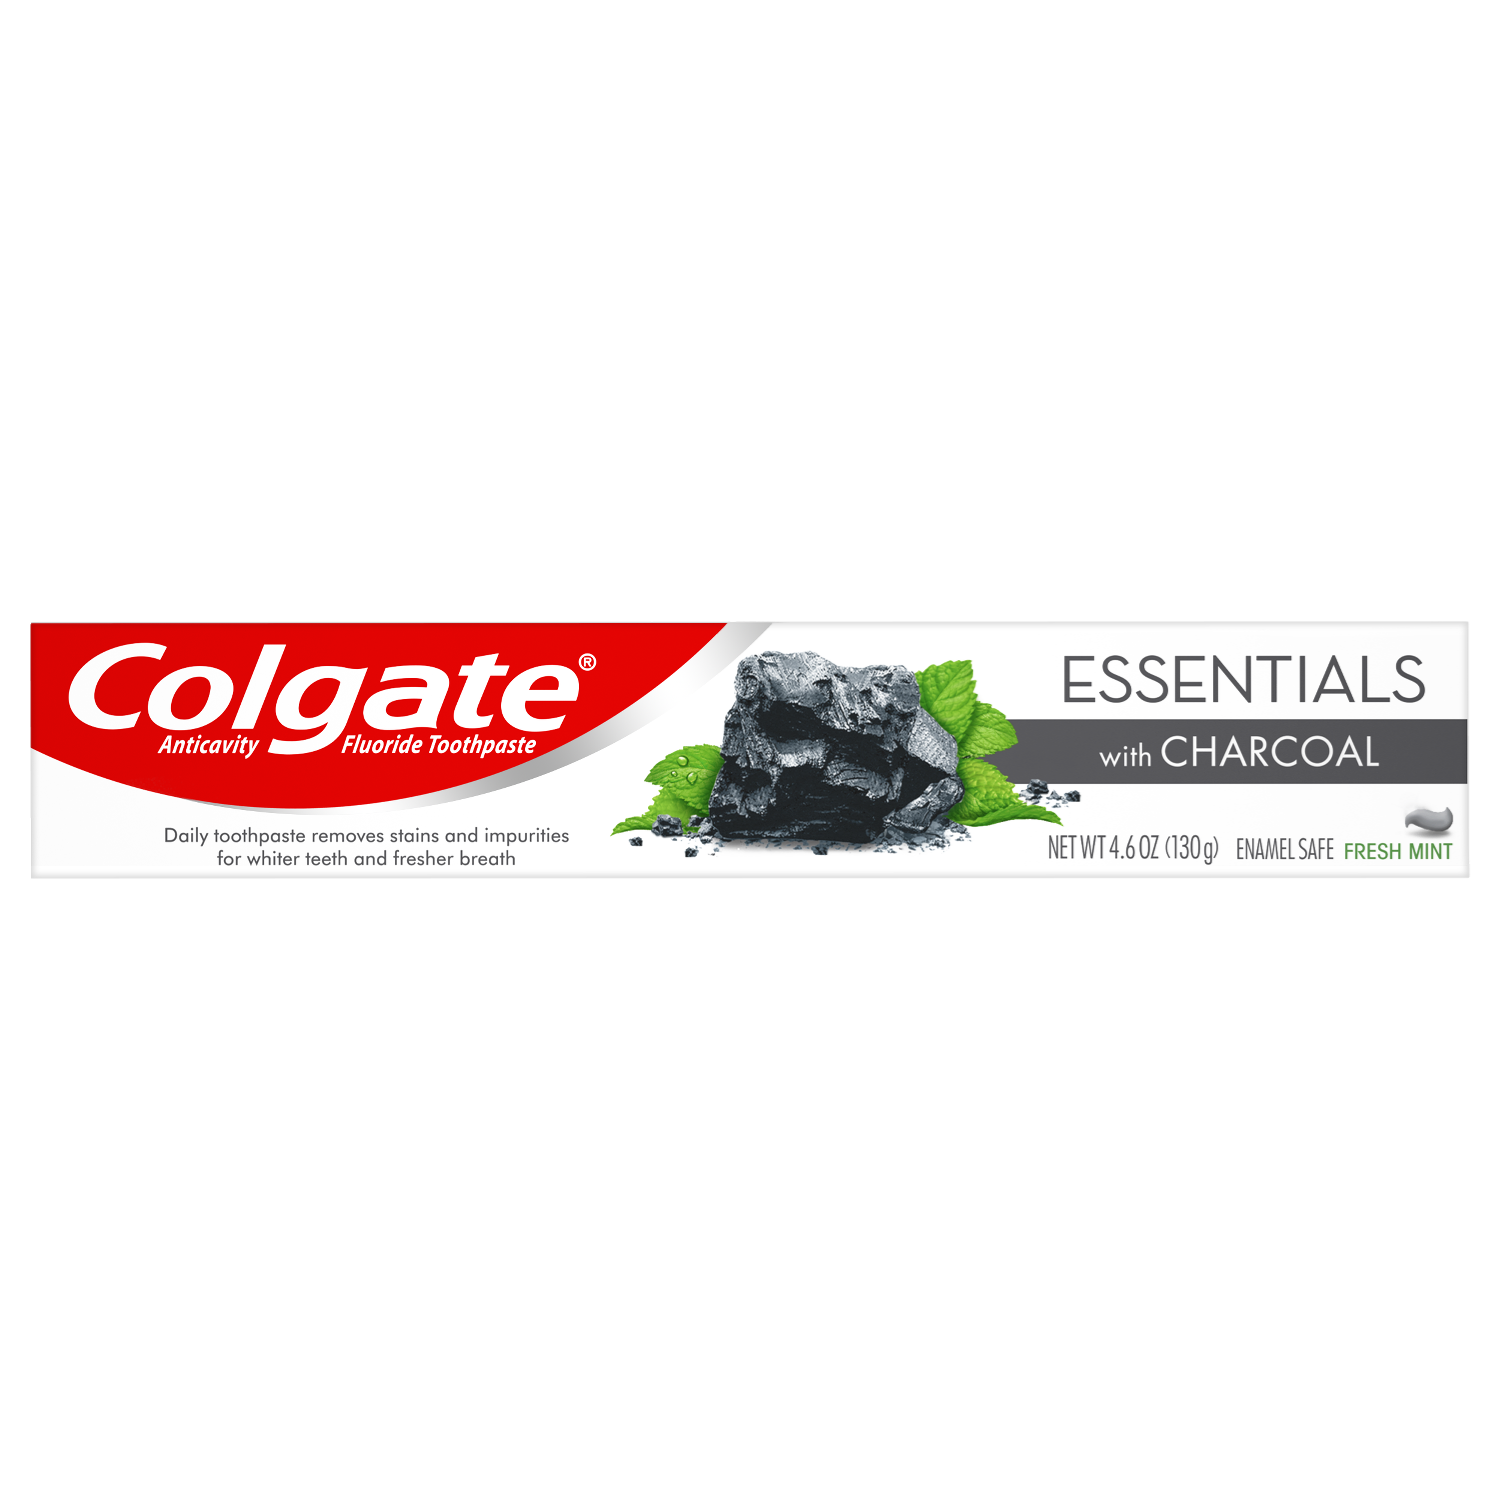 Colgate Charcoal Teeth Whitening Toothpaste, Fresh Mint, 4.6 oz - image 1 of 9